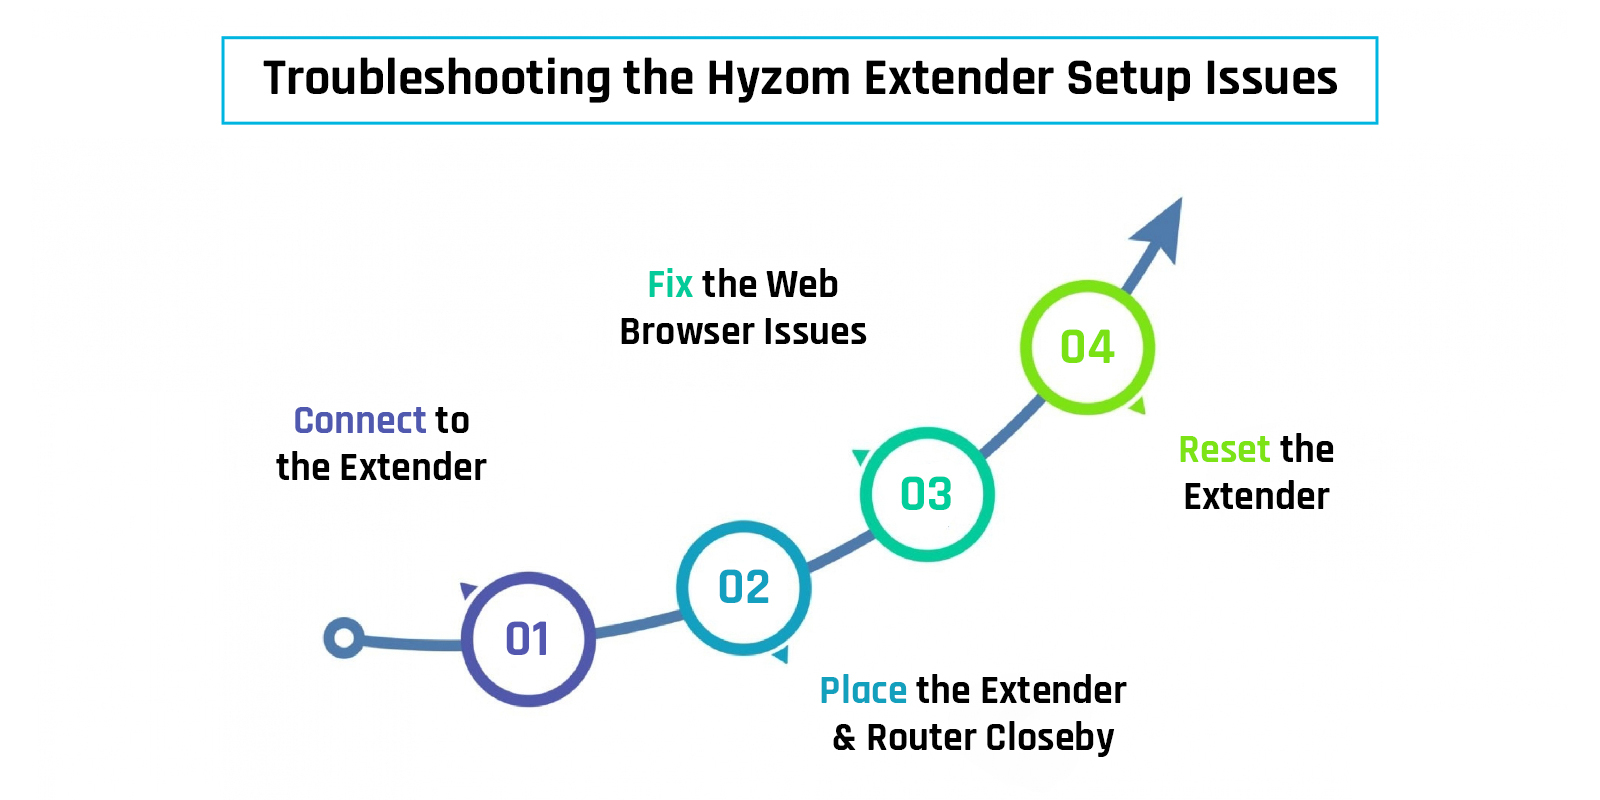 Troubleshooting the Hyzom Extender Setup Issues